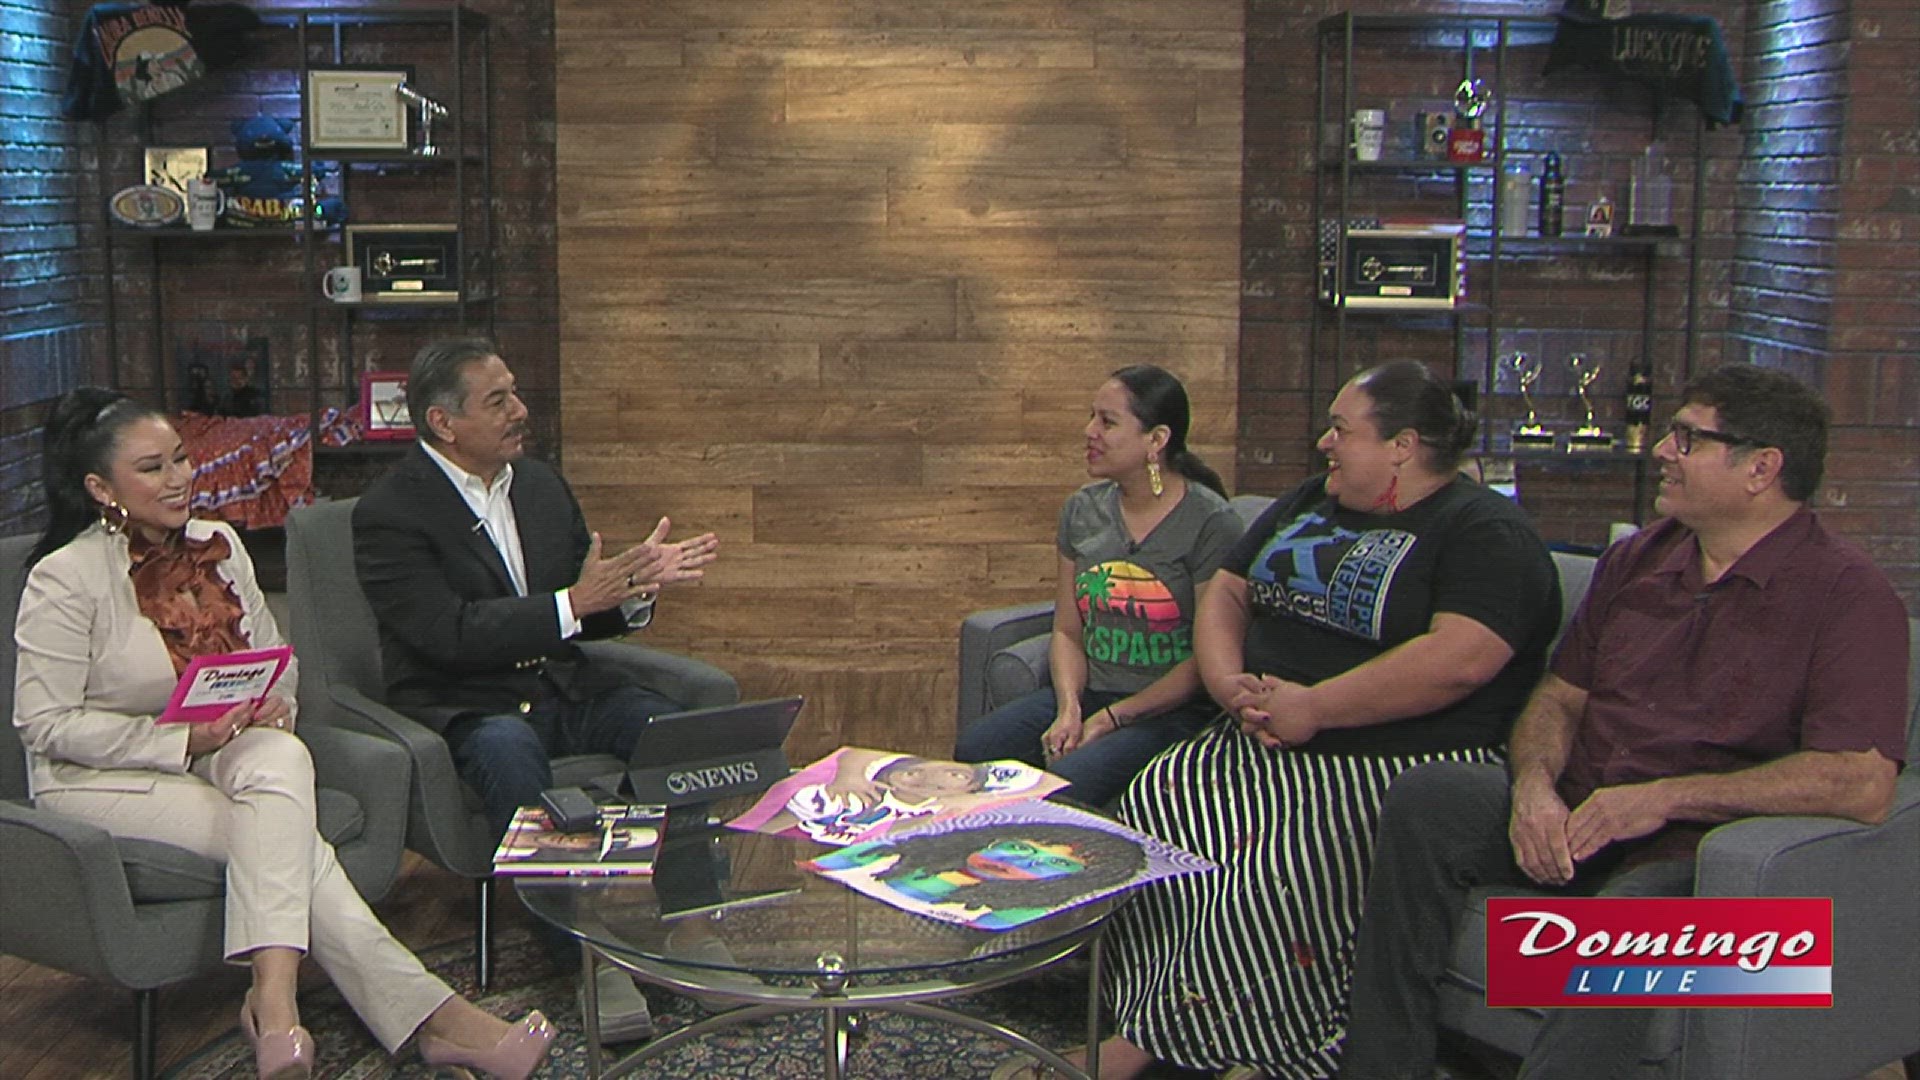 The Garcia Arts & Education Center joined us on Domingo Live to discuss the programs they will offer for artists and students throughout this new schoolyear.